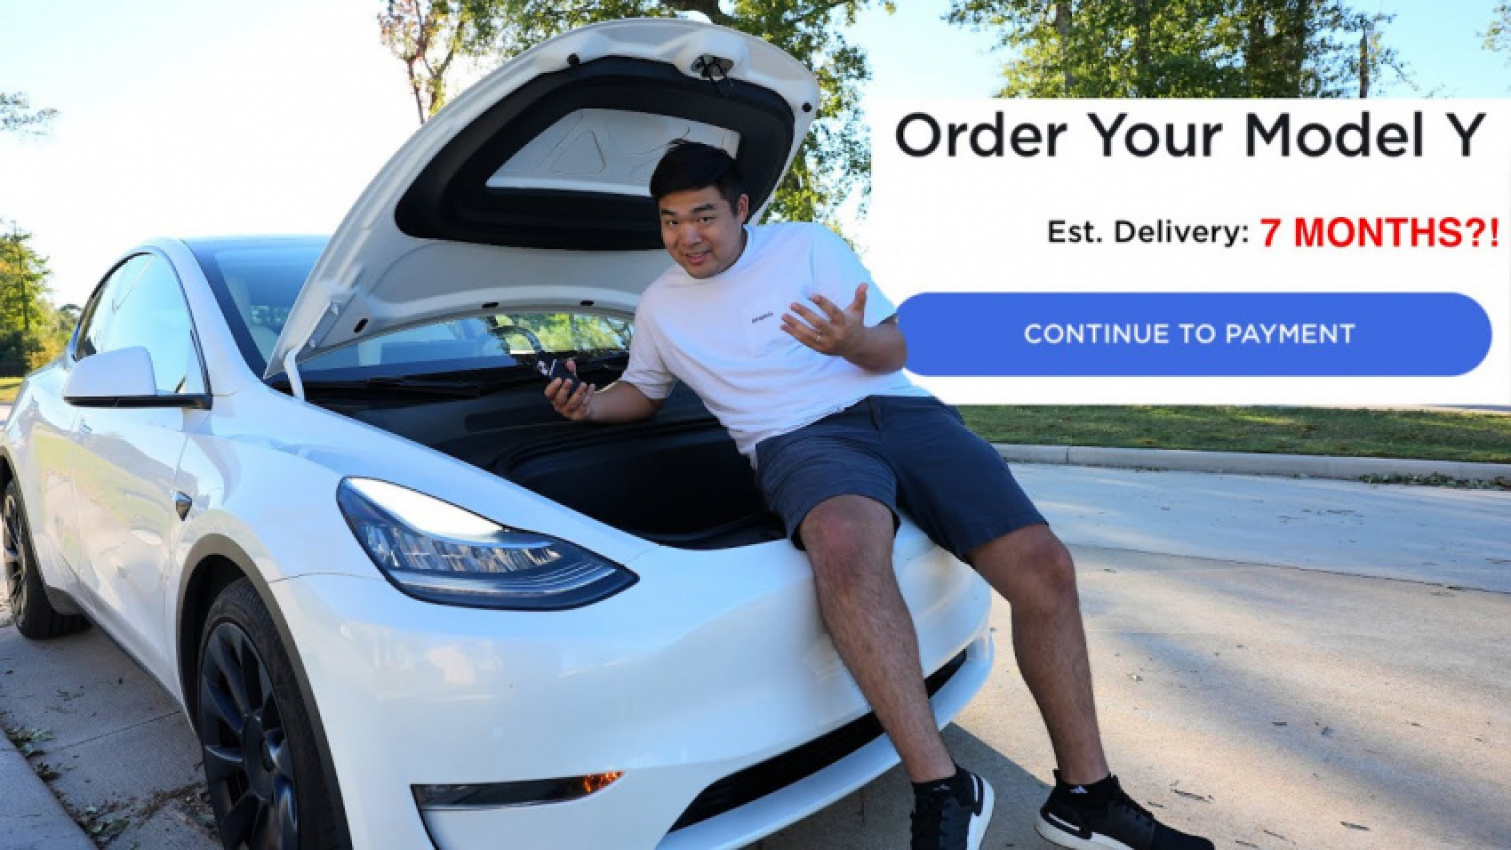 autos, cars, tesla, amazon, build quality of a tesla, buying a tesla, cost of owning a tesla, cost to but a tesla, how to buy a tesla, model 3, model s, model x, model y, ordering a tesla, review, tesla bad build quality, tesla build quality, tesla buying experience, tesla delivery day, tesla delivery process, tesla experience, tesla model 3, tesla model s, tesla model x, tesla model y, tesla ordering process, tesla review, tesla wait time, what to know before buying a tesla, amazon, the tesla model y buying experience: ordering to delivery summarized.